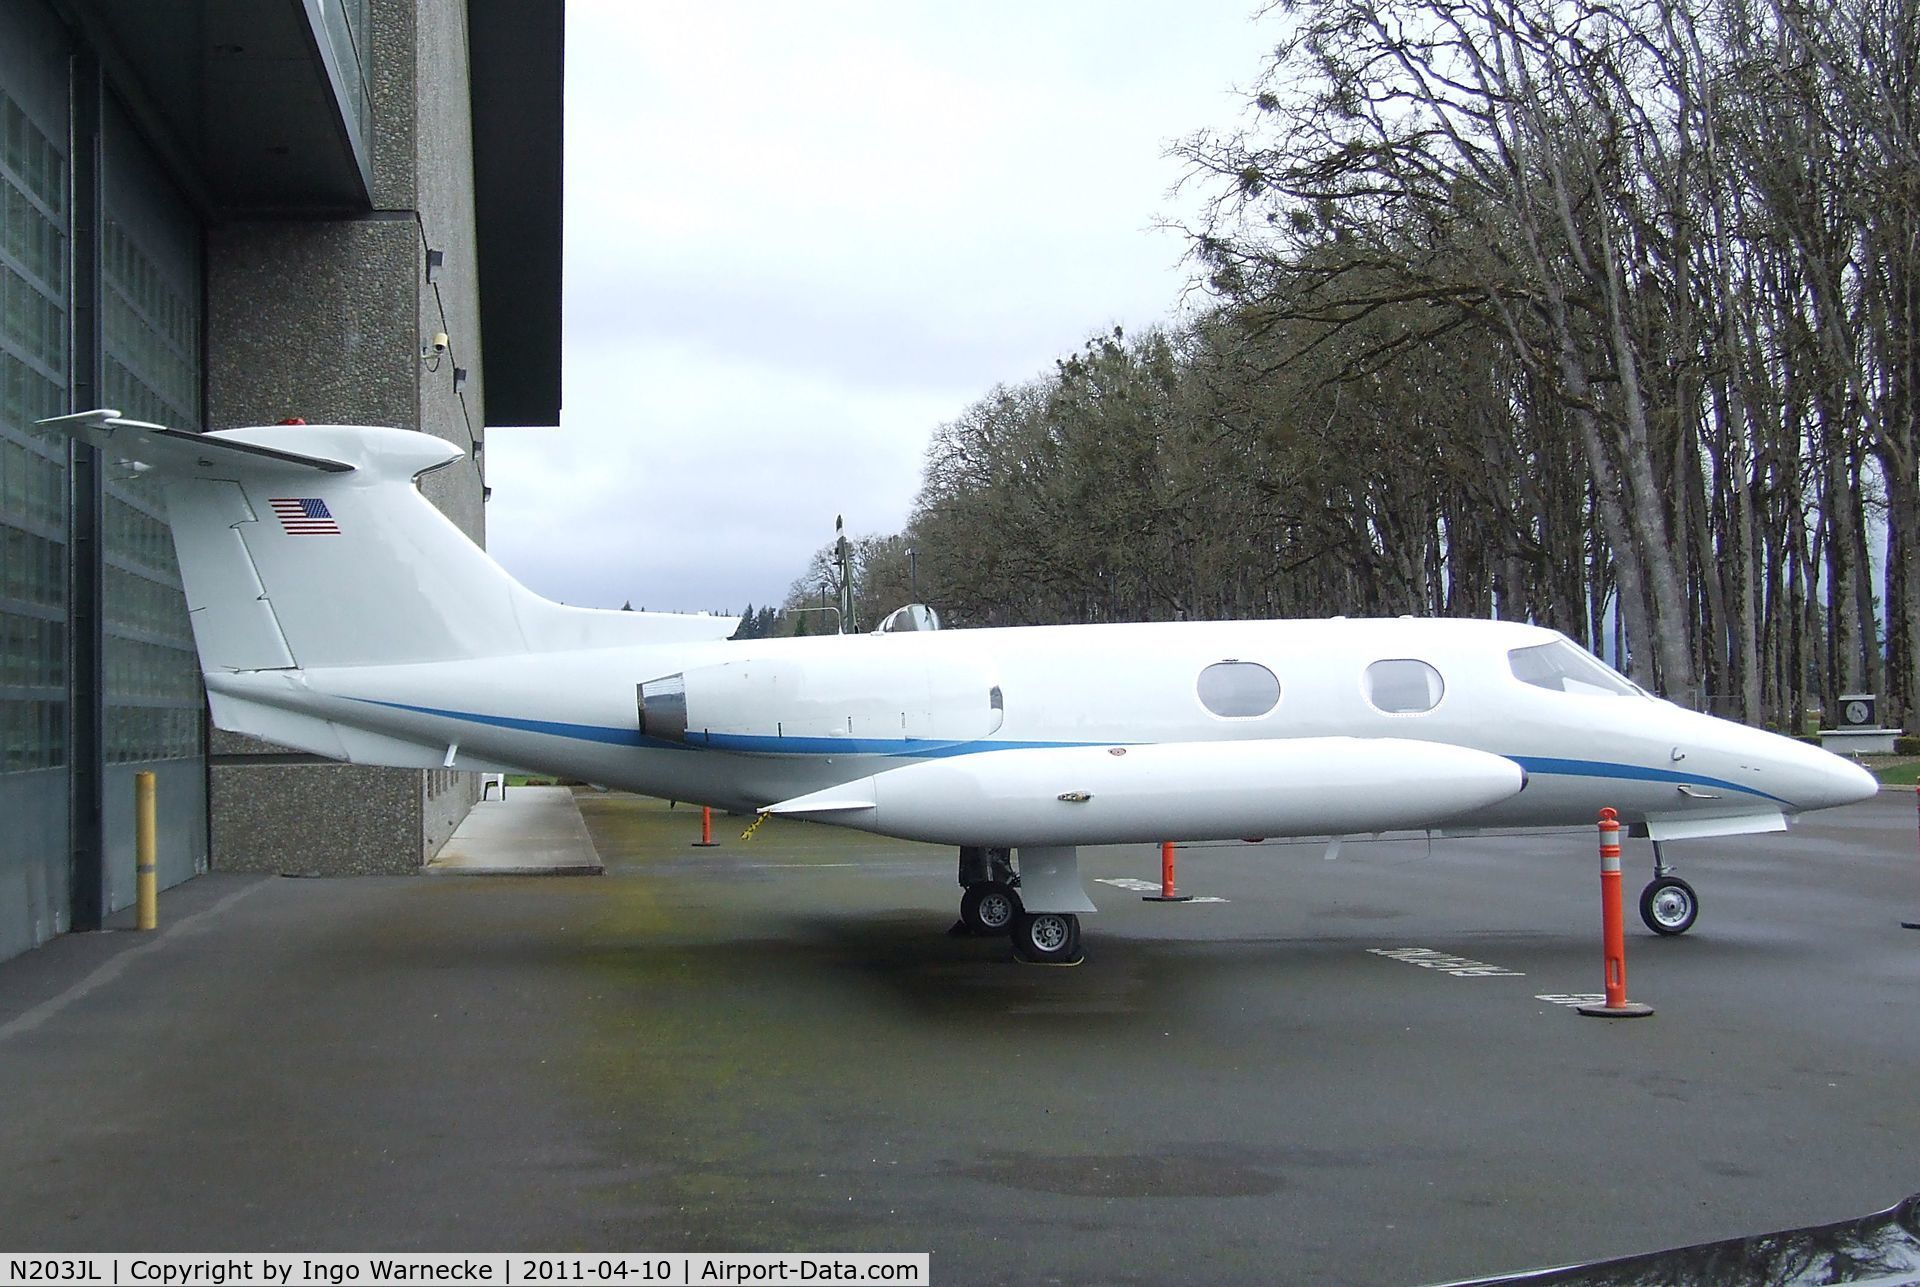 N203JL, 1969 Learjet 24B C/N 203, Lear Learjet 24B at the Evergreen Aviation & Space Museum, McMinnville OR